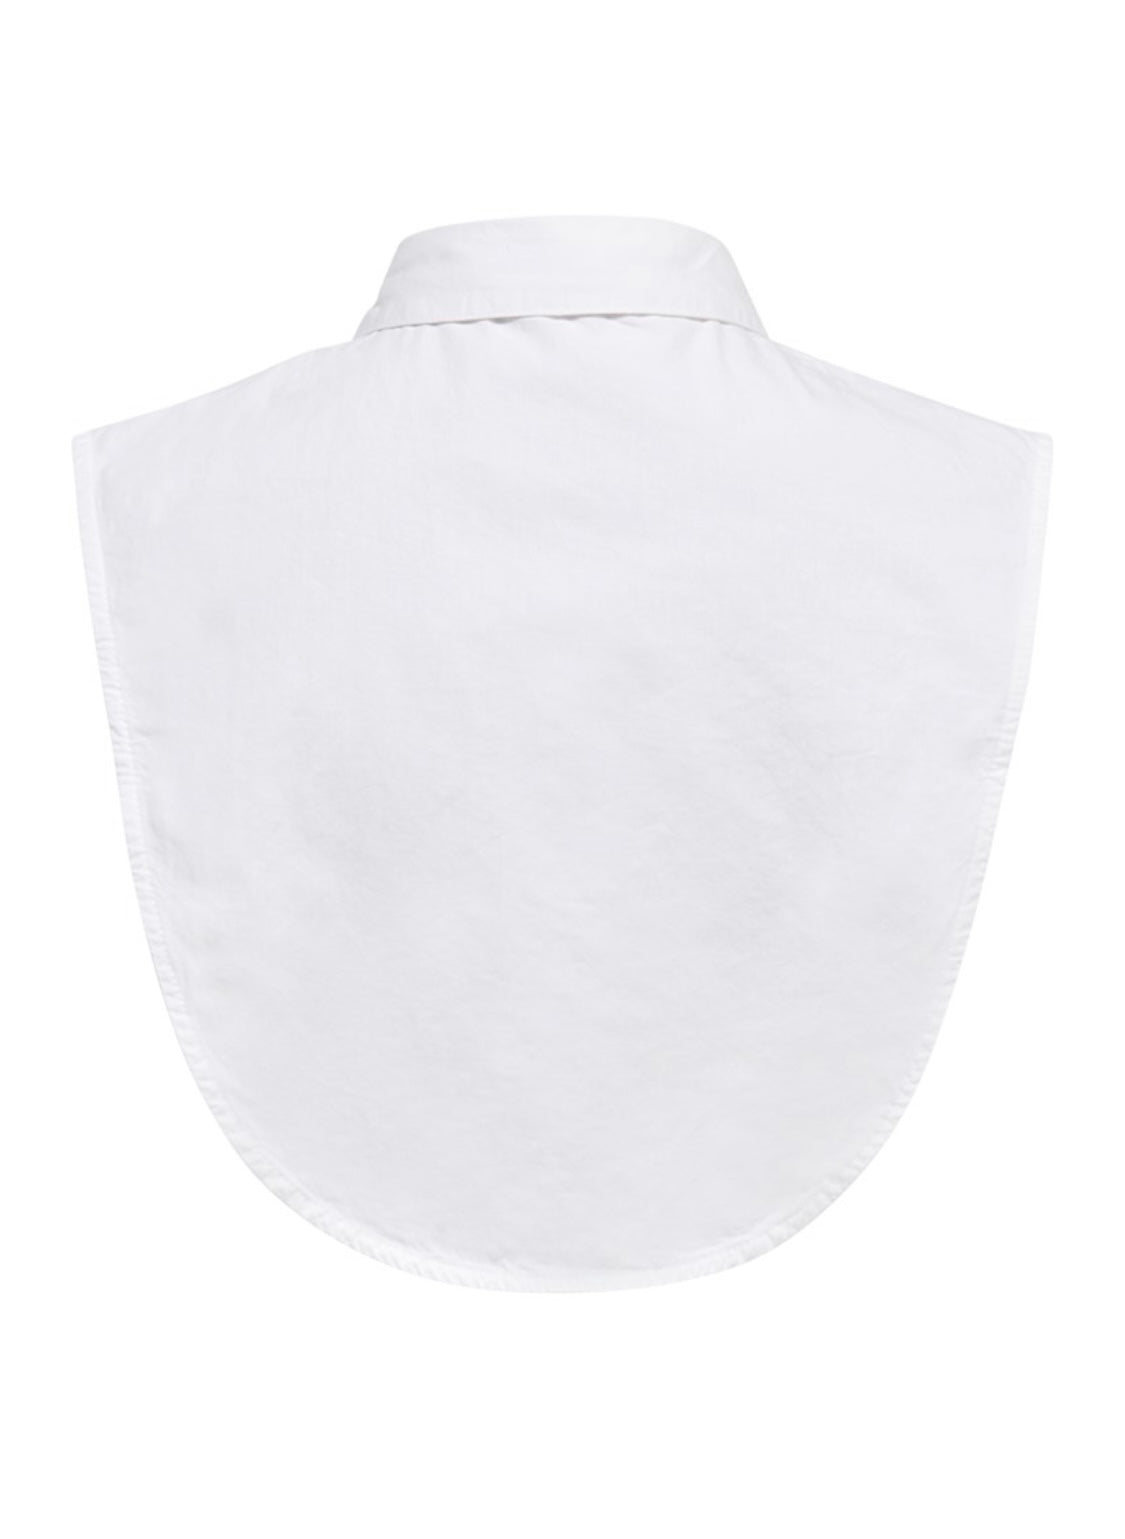 ONLY - SHELLY LIFE WEAVED COLLAR - WHITE